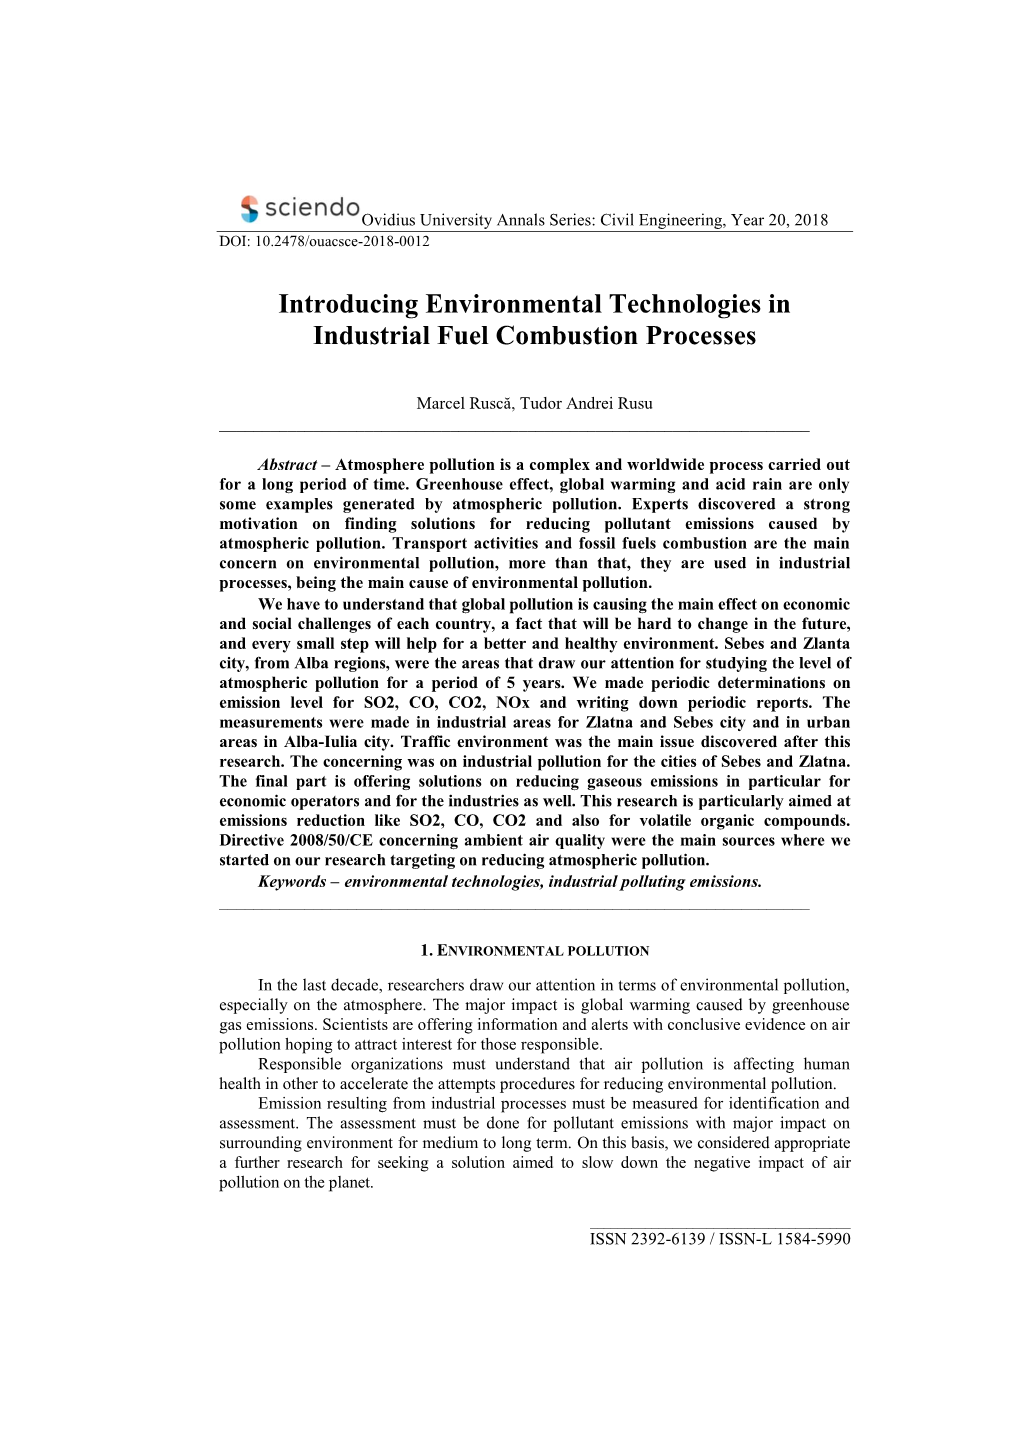 Introducing Environmental Technologies in Industrial Fuel Combustion Processes